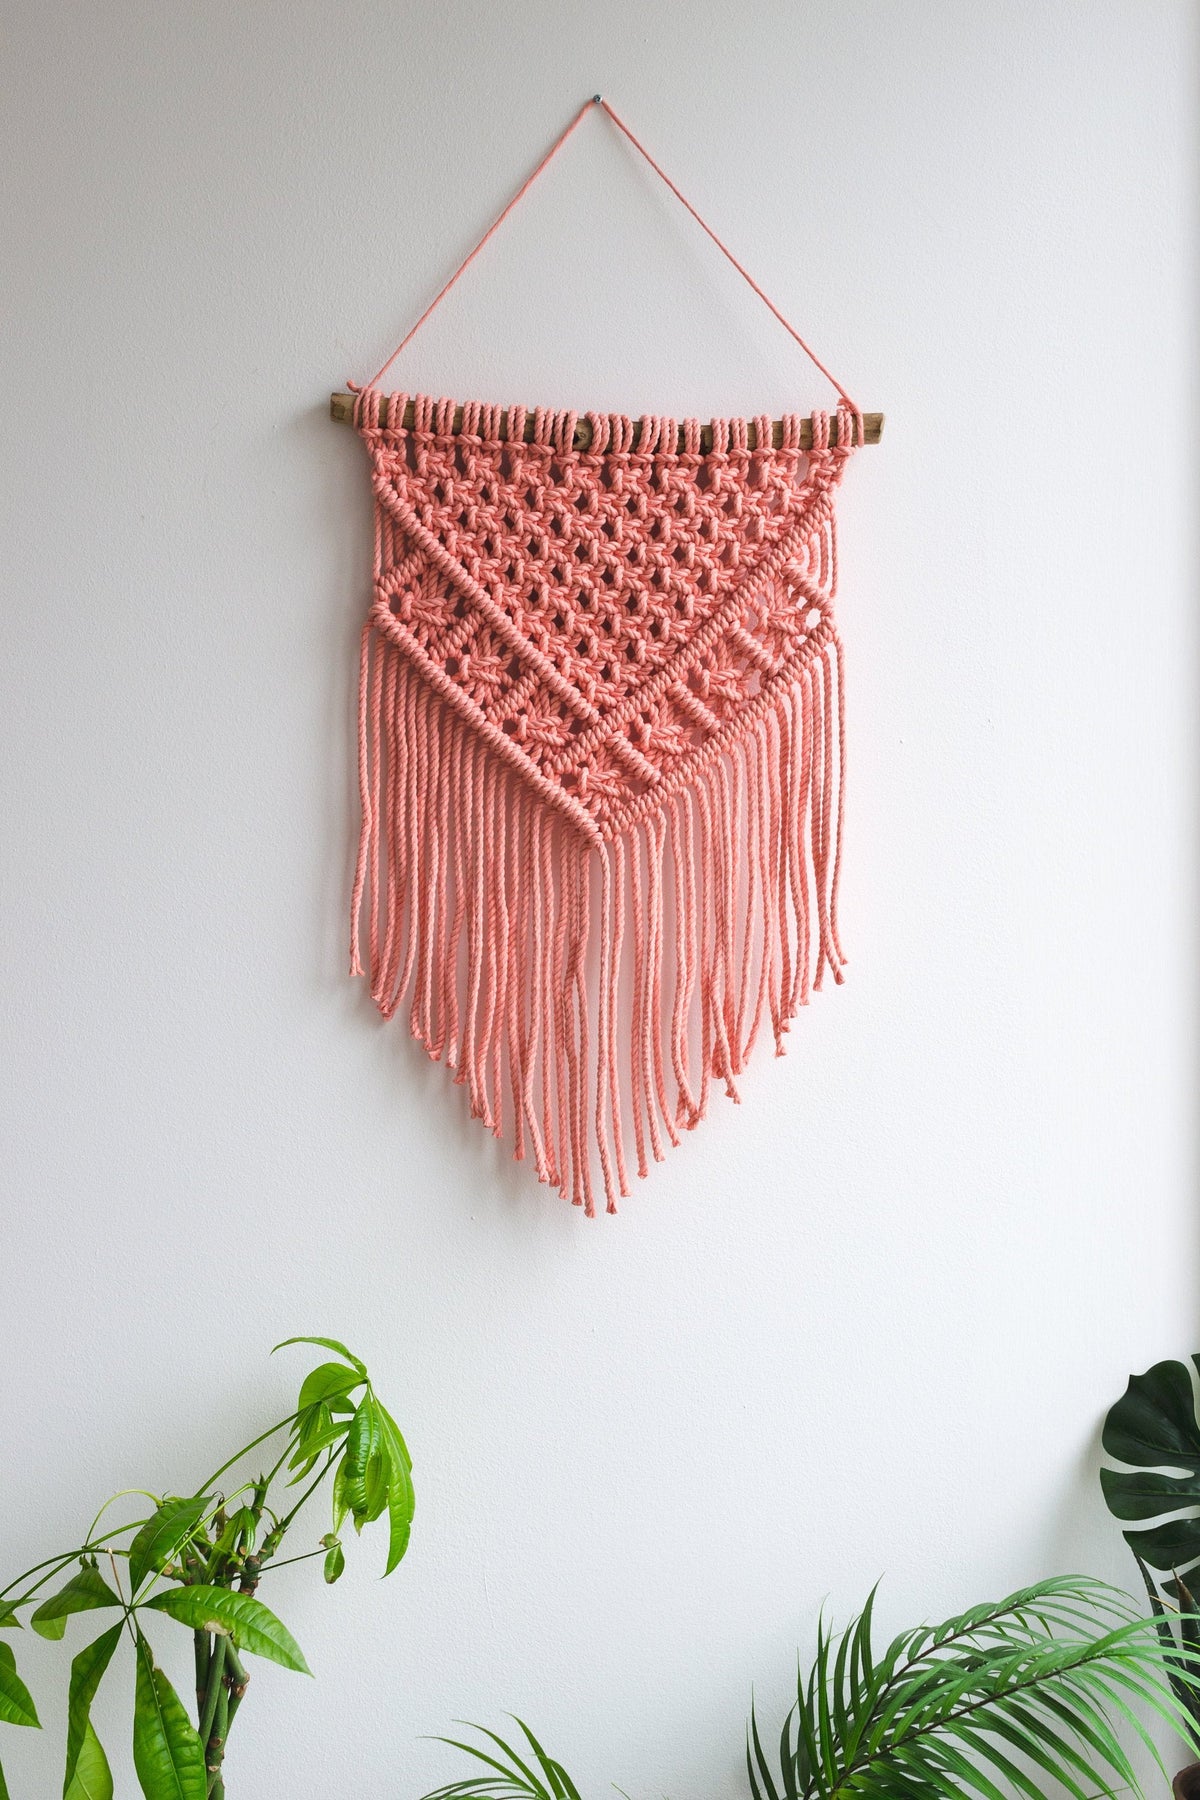 Macrame wall hanging / Nursery decor /  Available in 12 different colors.